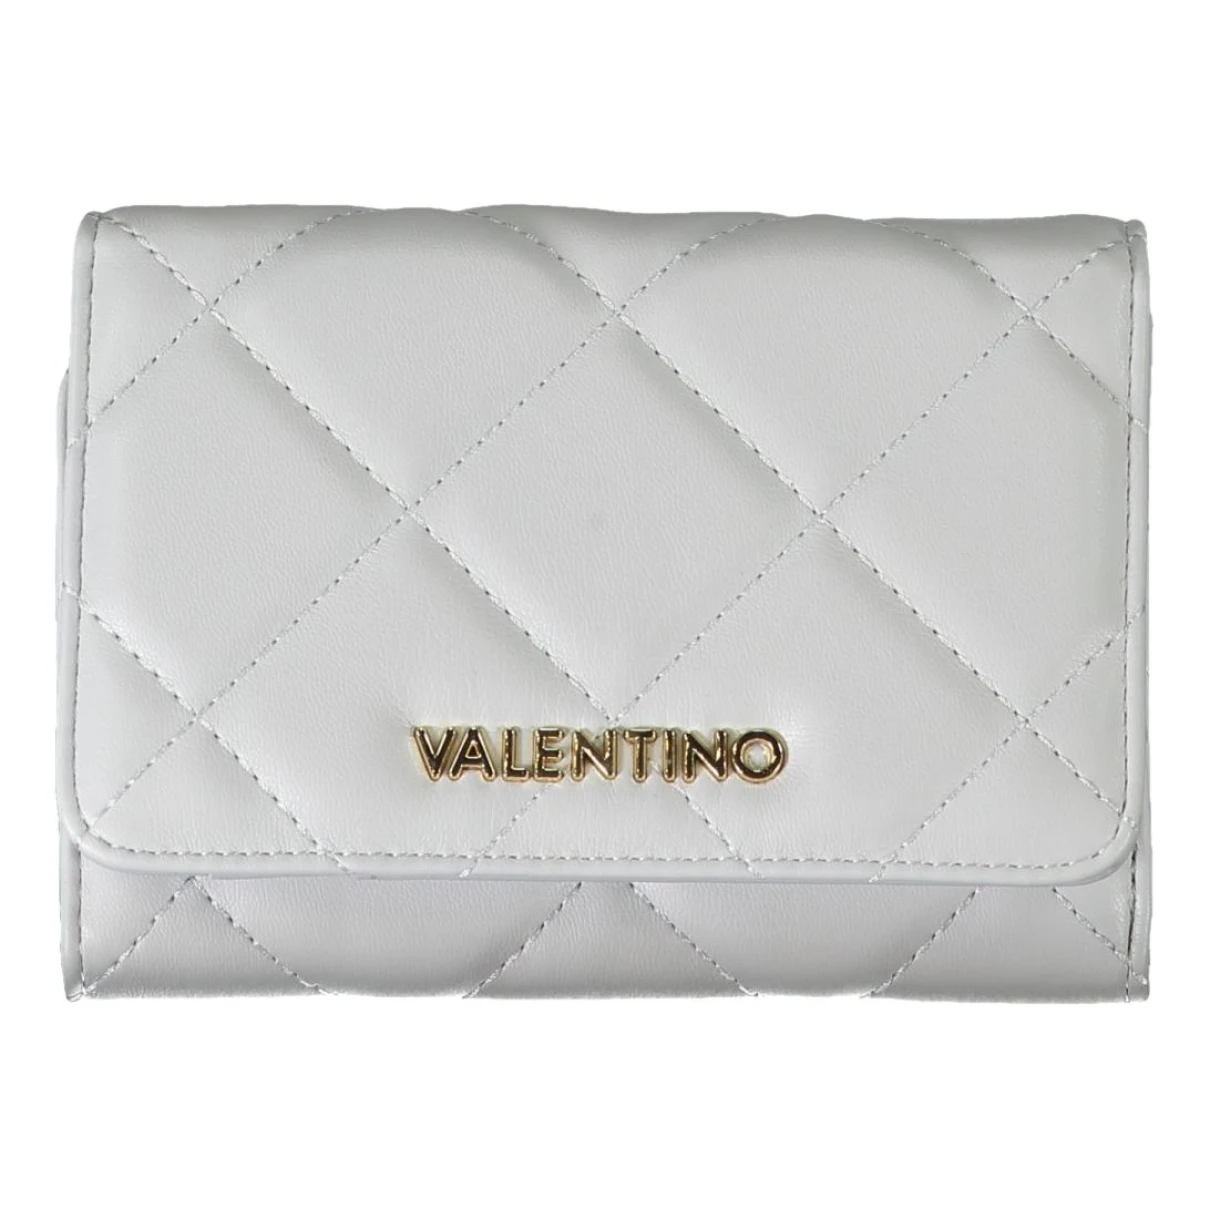 accessories Mario Valentino wallets for Female Other. Used condition